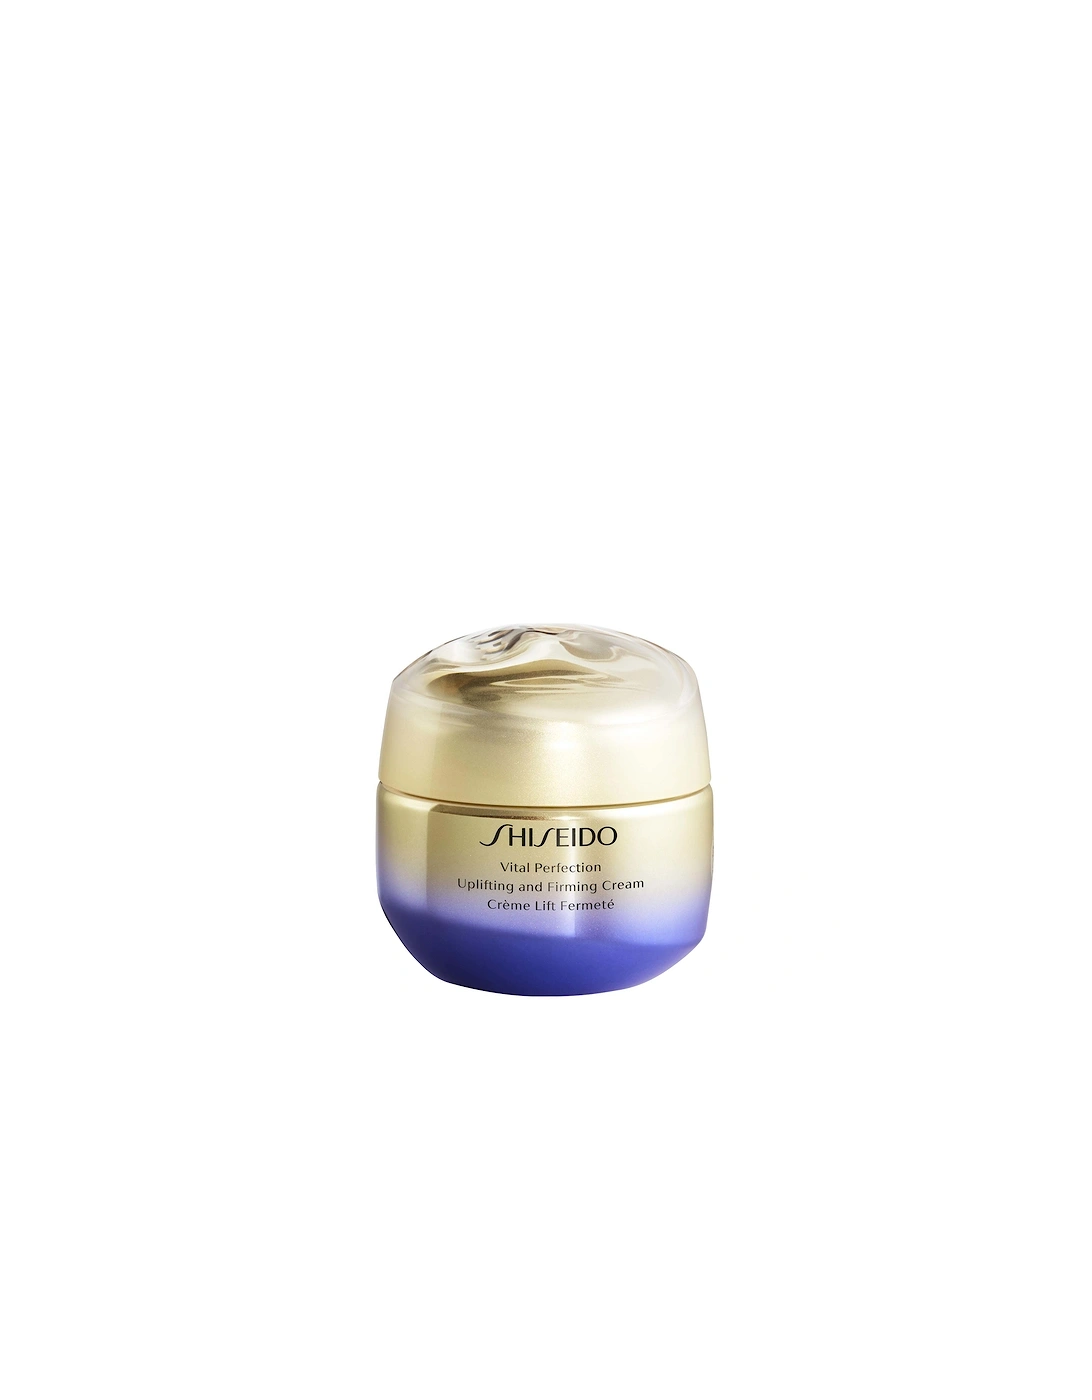 Vital Perfection Uplifting and Firming Cream 50ml - - Vital Perfection Uplifting and Firming Cream 50ml - Vital Perfection Uplifting and Firming Cream 75ml, 2 of 1